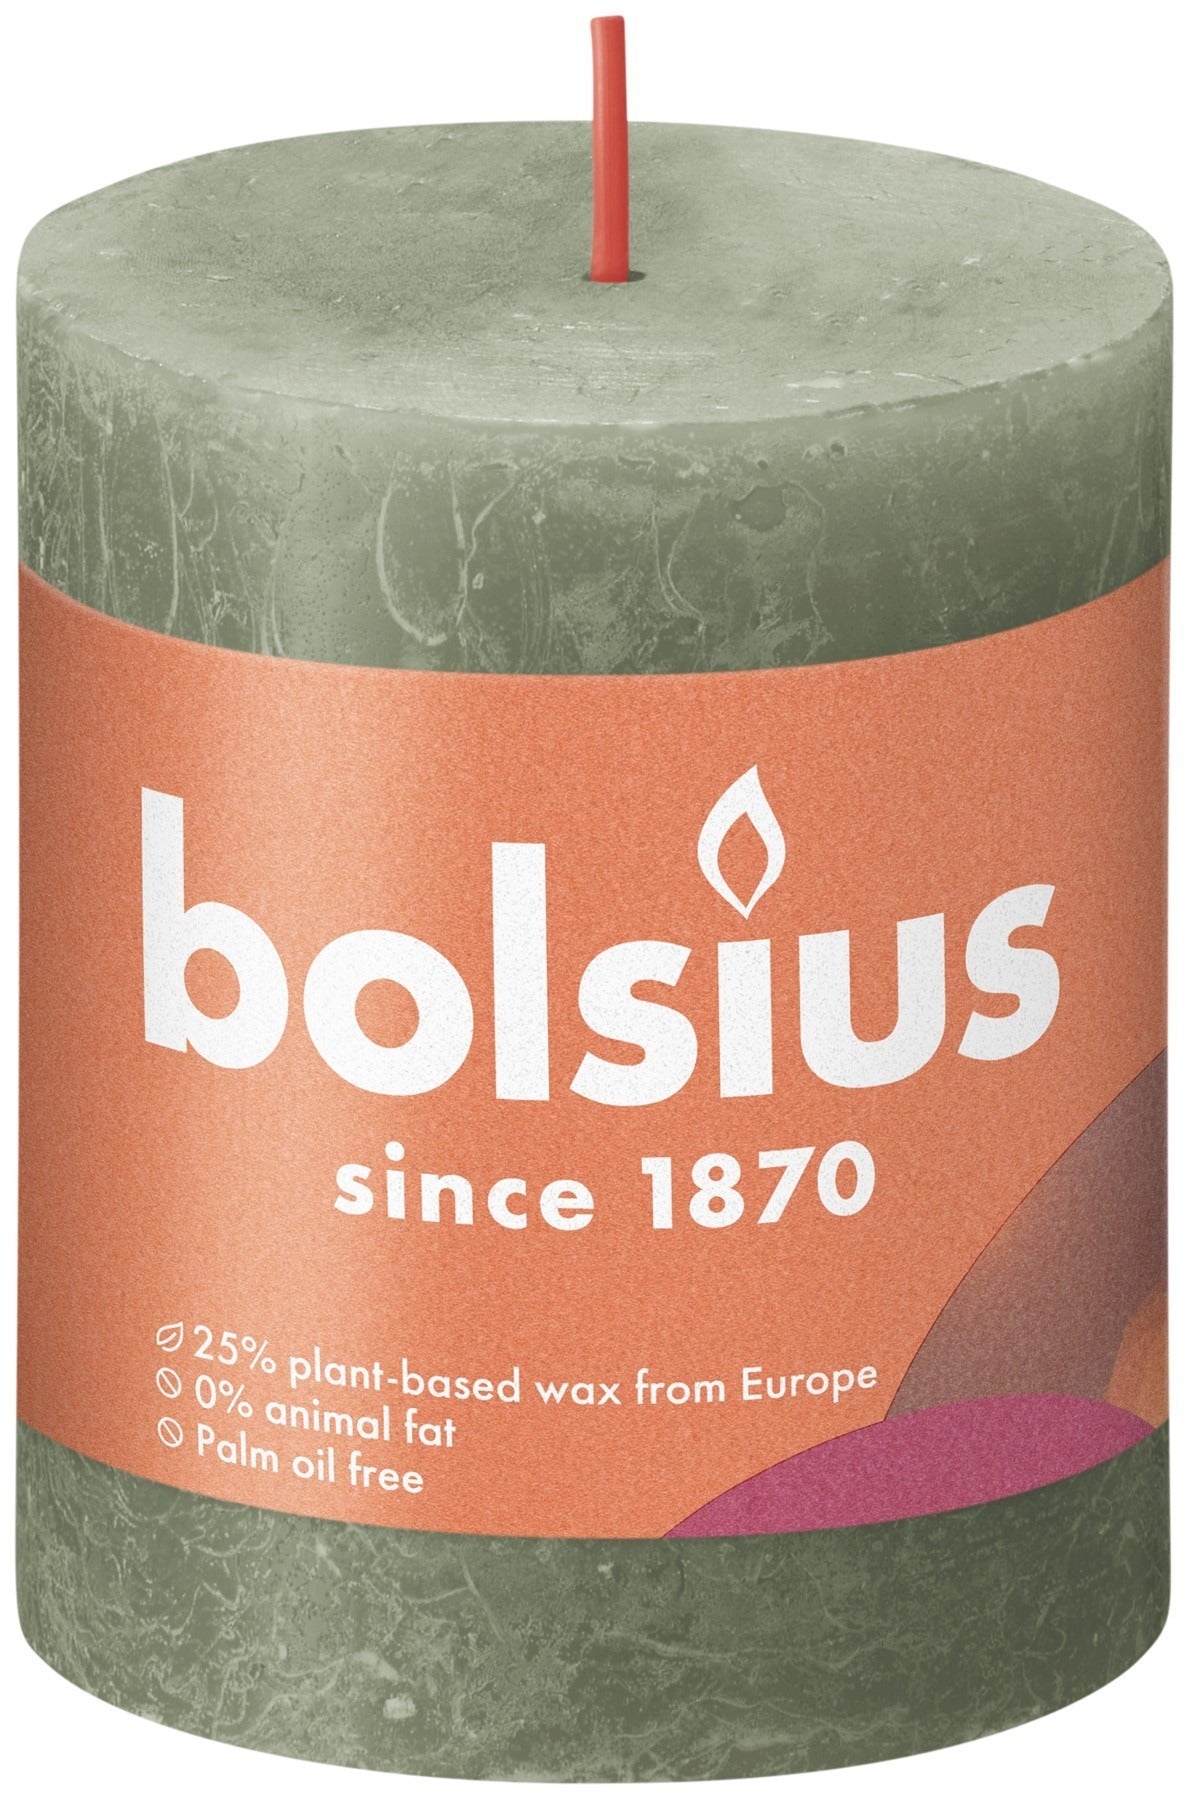 View Fresh Olive Bolsius Rustic Shine Pillar Candle 80mm x 68mm information